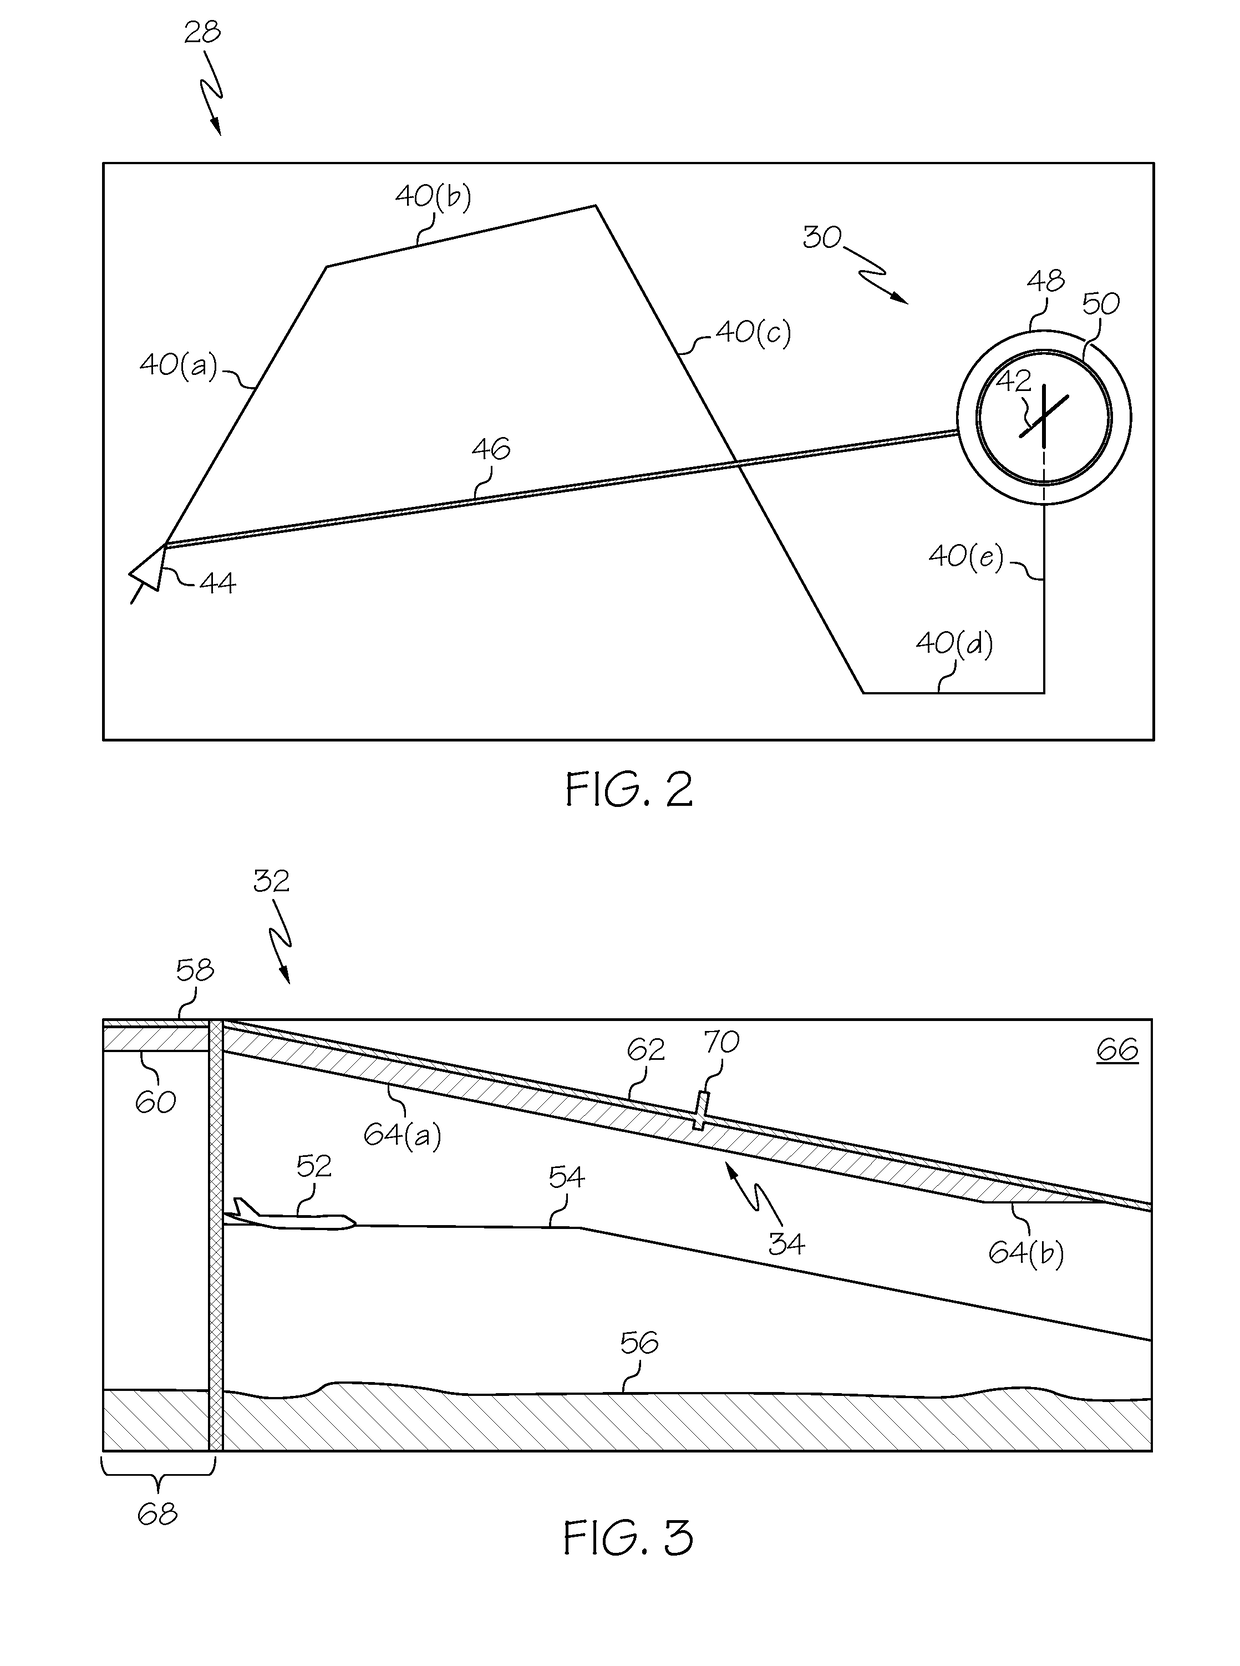 Cockpit display systems and methods for generating cockpit displays including direct approach energy management symbology